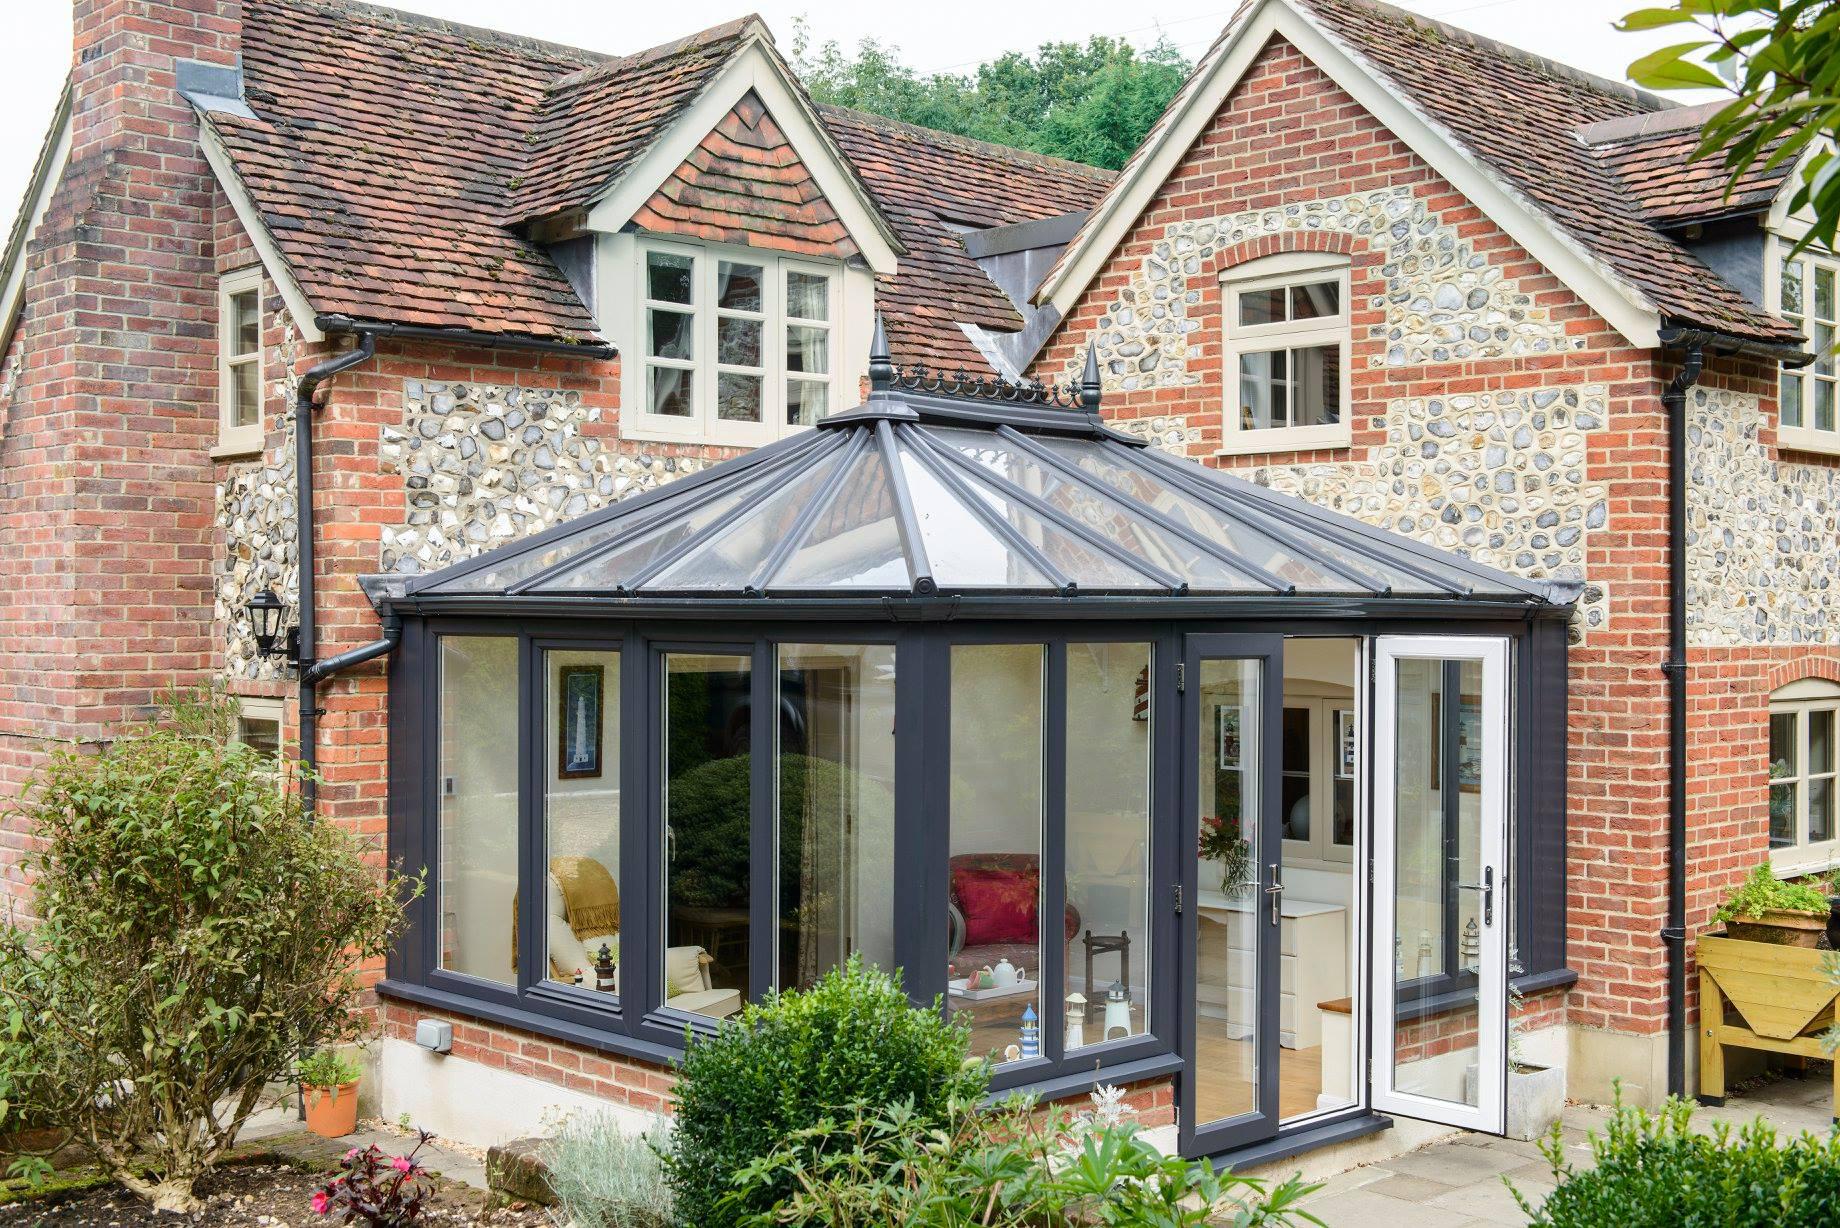 Perfect for panoramic views, our Elizabethan conservatory mixes distinctive, uncomplicated lines with an airy, rectangular shape to create an understated yet imposing living space.